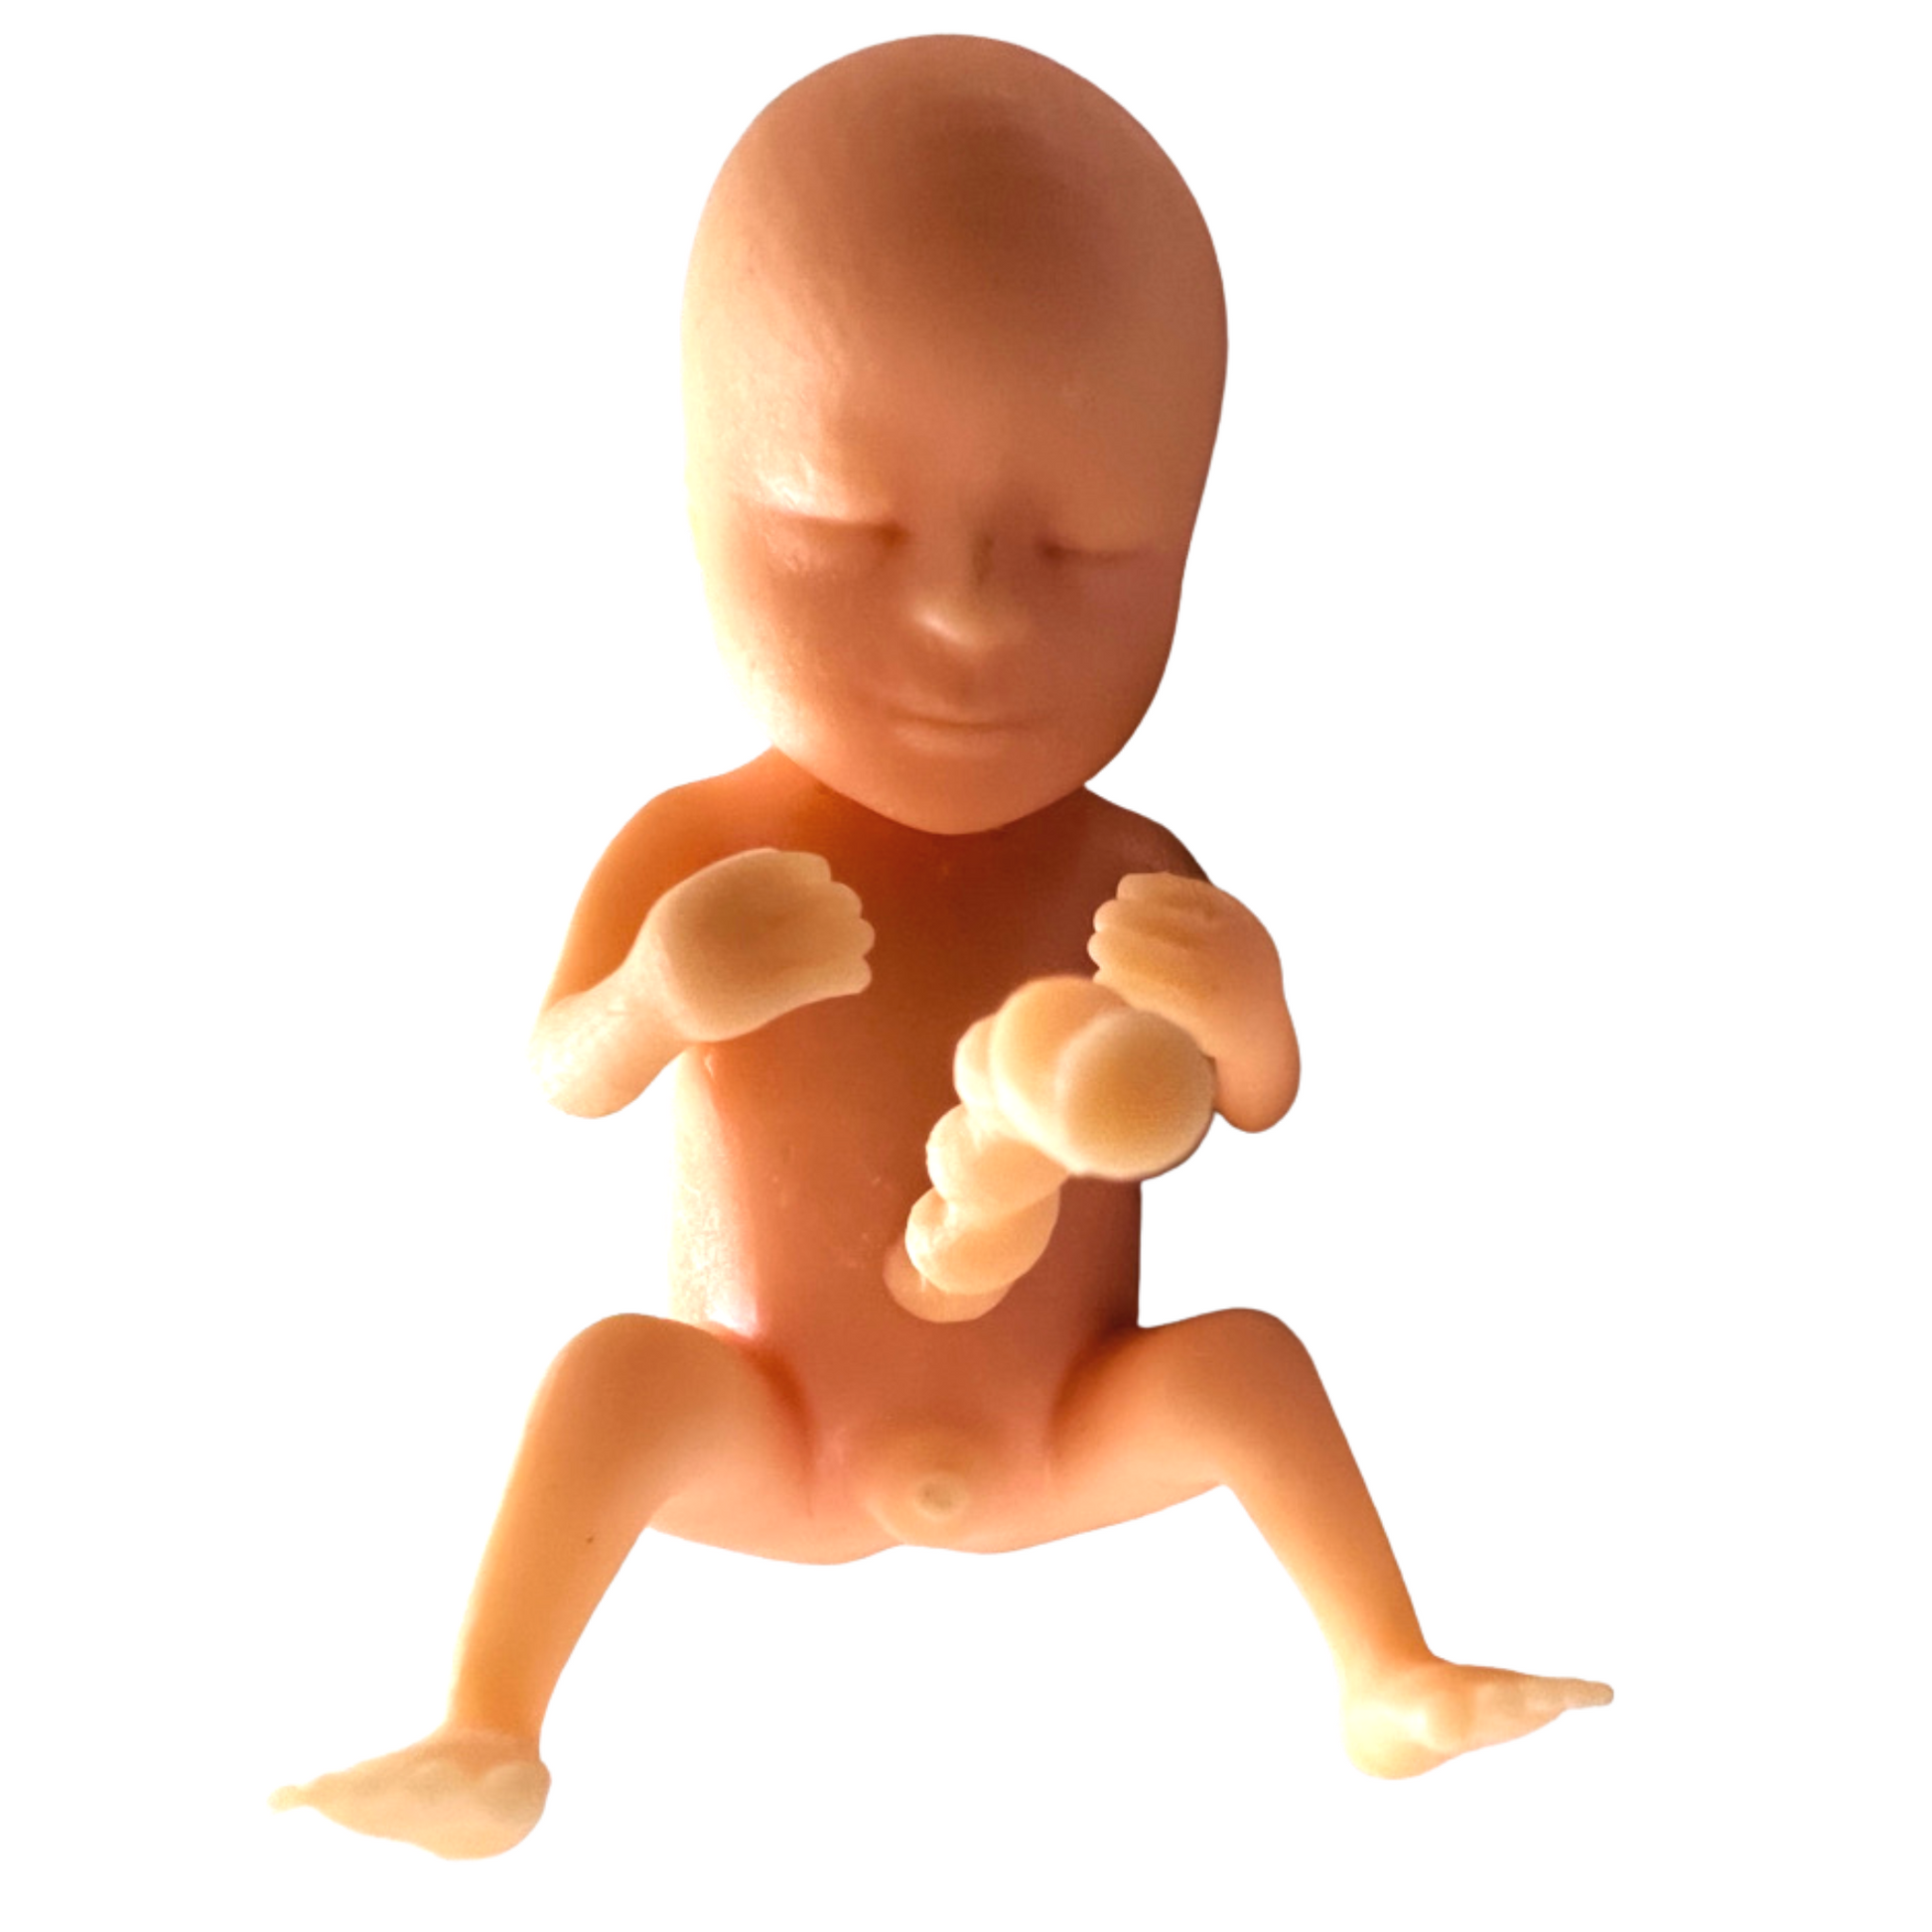 Image of 3D printed fetus at 12 weeks and the emergence of sex organs.